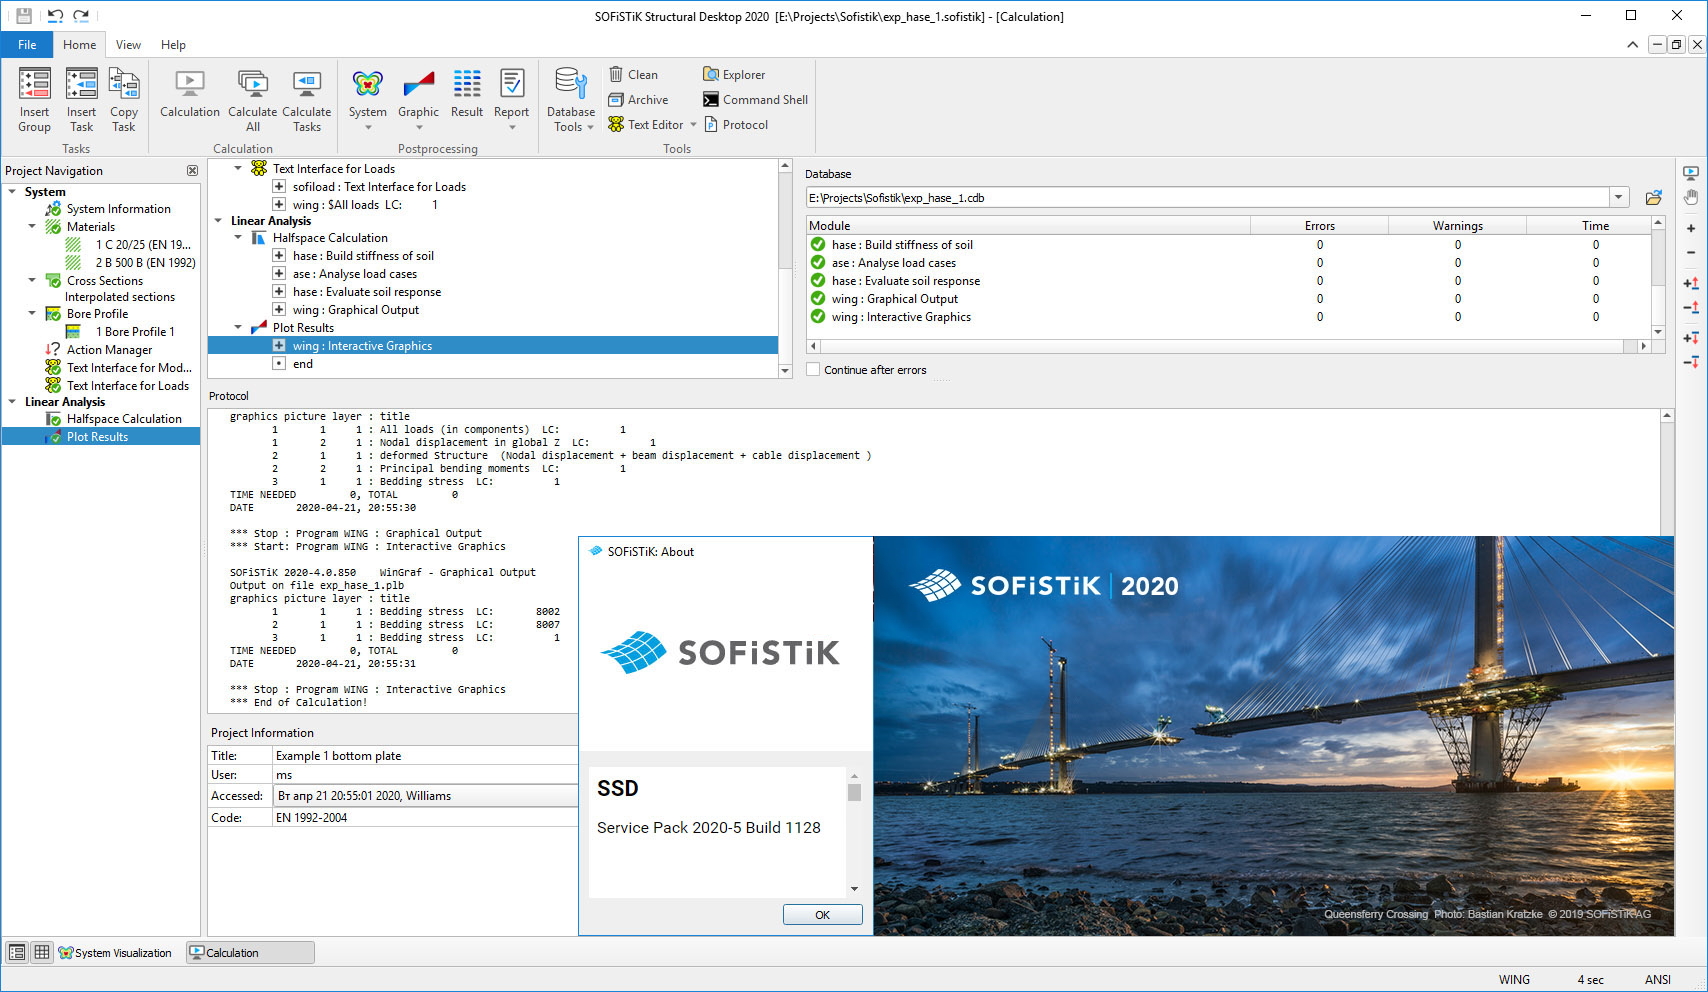 Working with SOFiSTiK 2020-5 Build 1128 full license